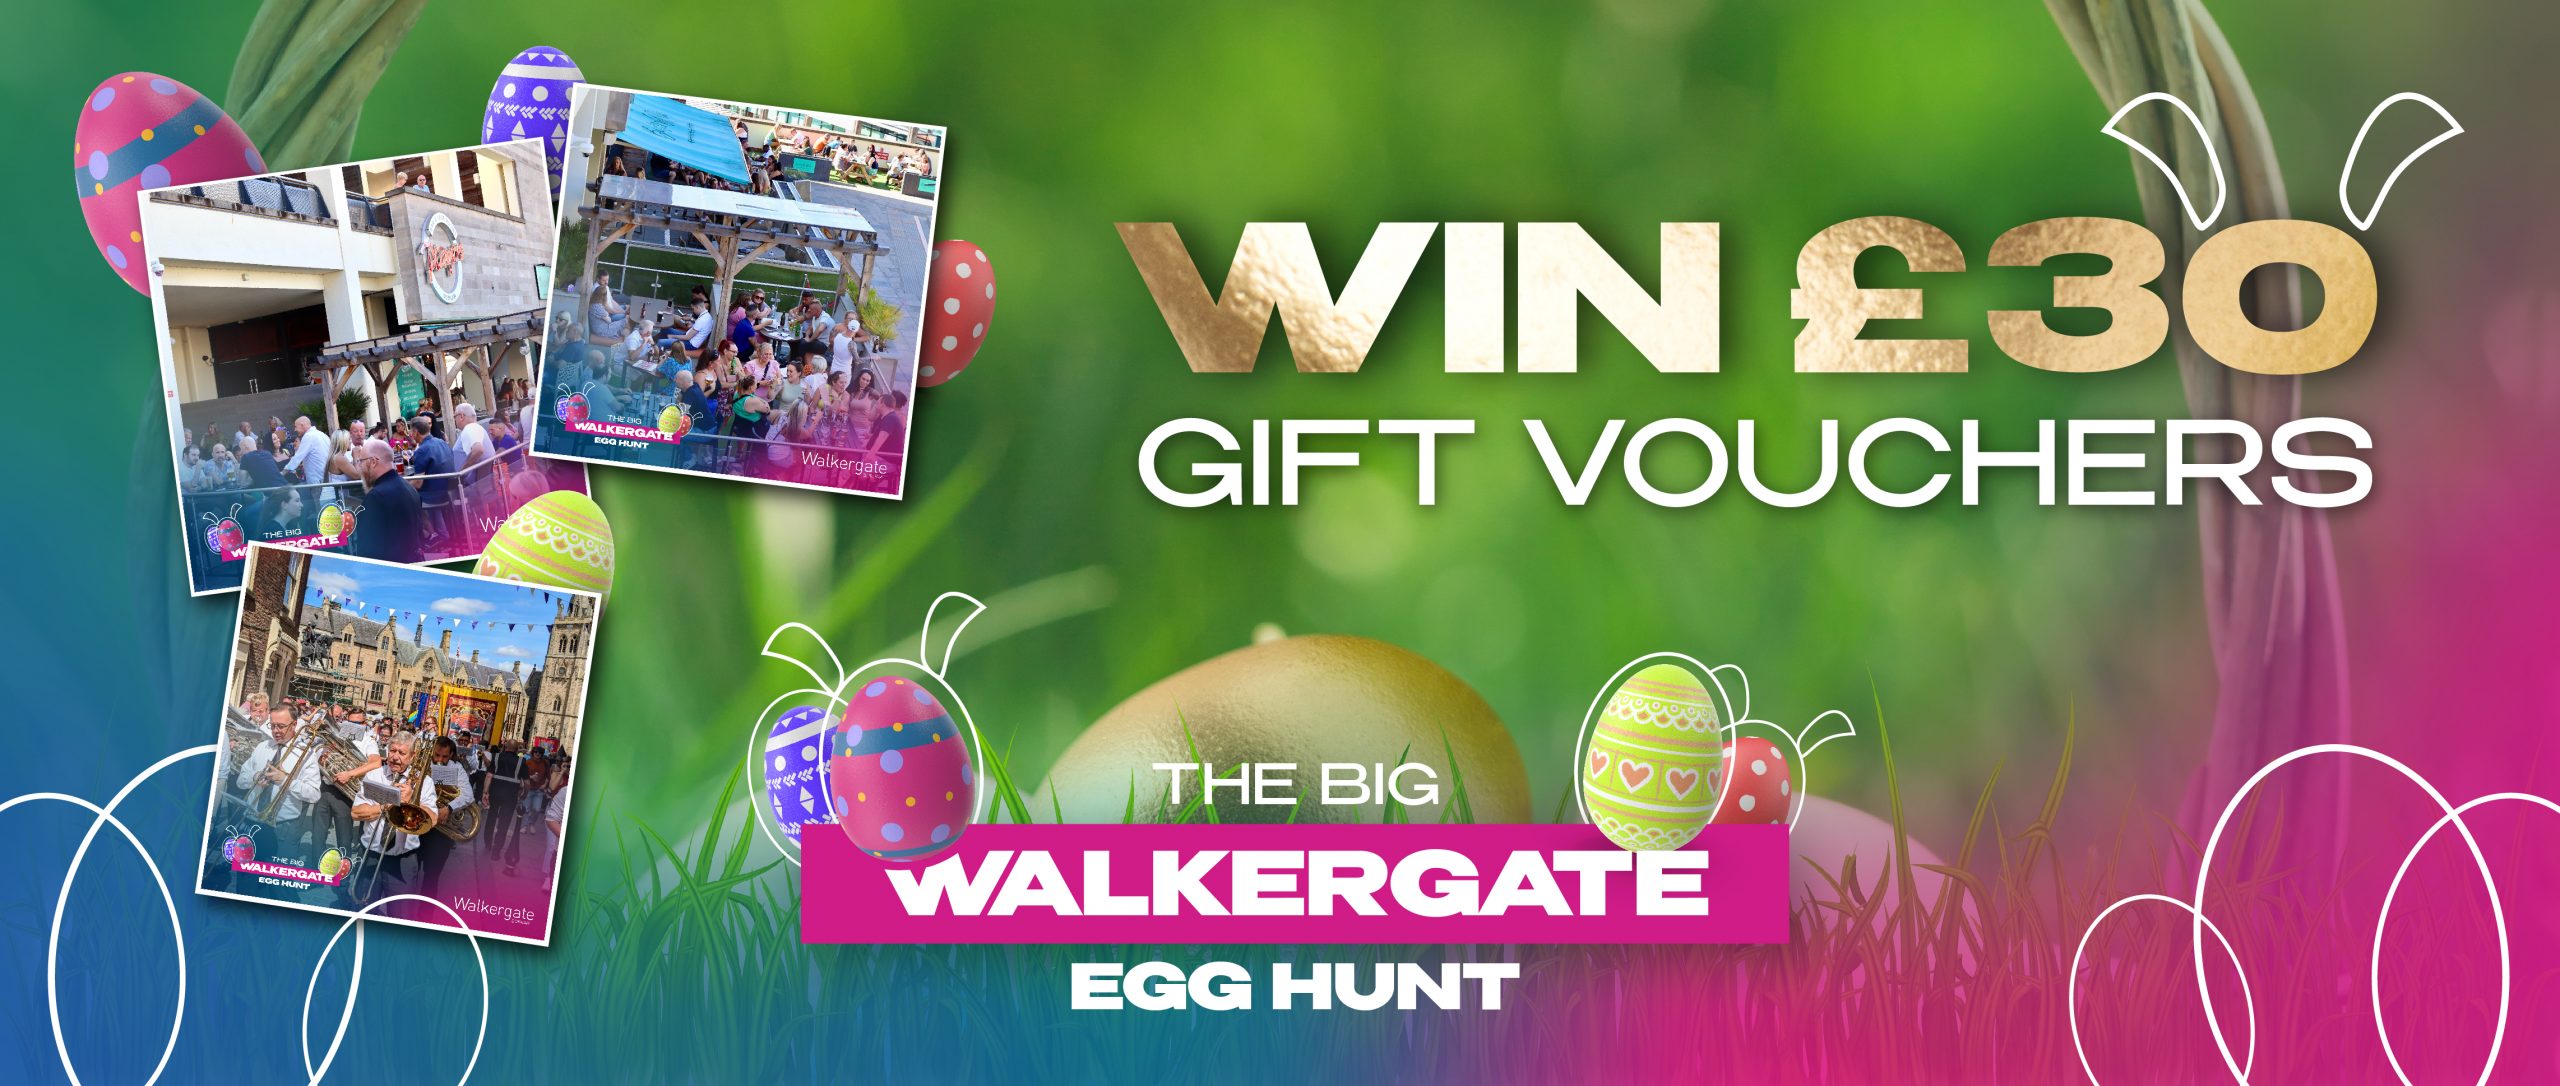 walkergate durham Easter competition to win £30 gift voucher